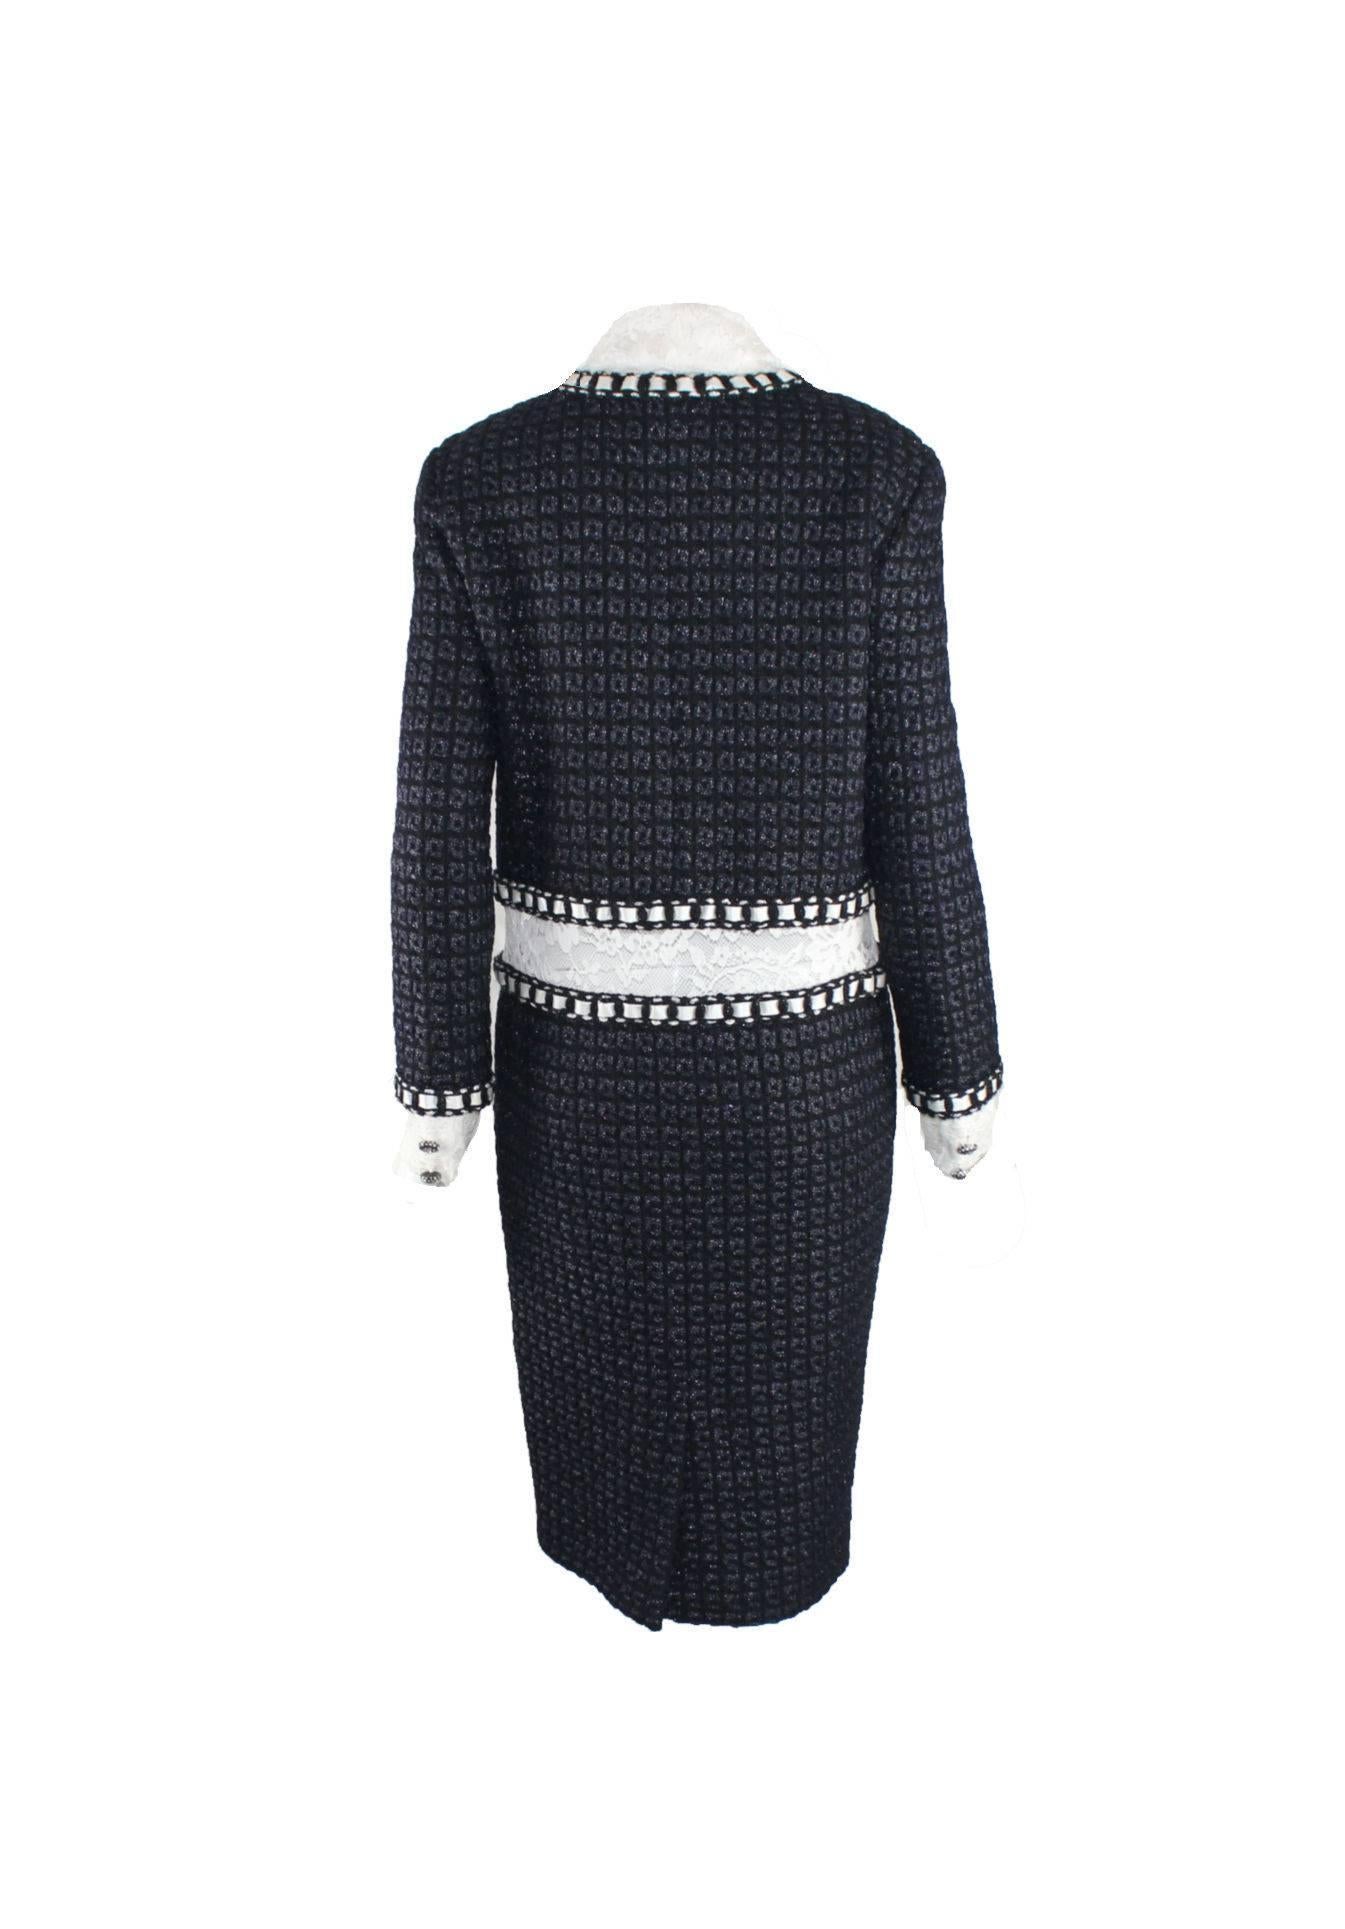 Rare Find!  
Gorgeous Timeless Classic  Chanel Lesage Tweed & Lace Dress  Designed By Karl Lagerfeld  
A True Chanel Piece That Should Be In Every Woman's Wardrobe   

Details:

    Beautiful CHANEL tweed & lace dress
    A true CHANEL signature